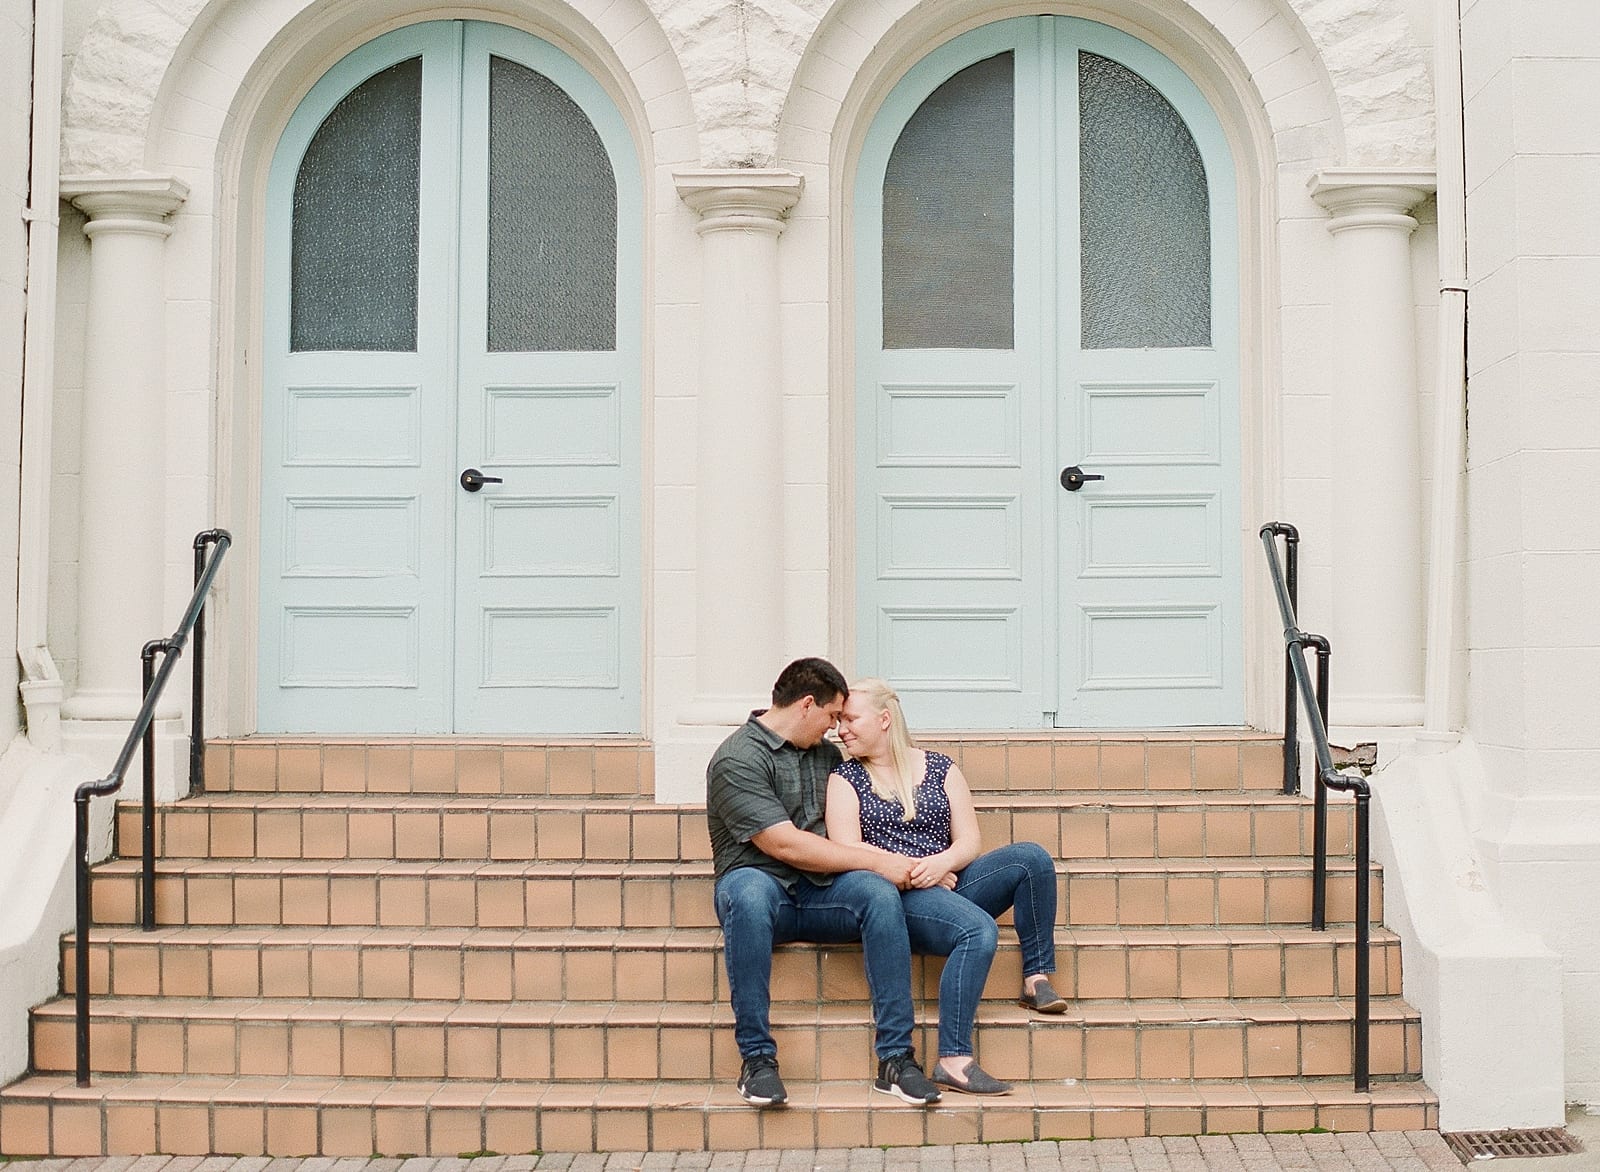 Downtown Raleigh NC Couple Sitting on Stairs Photo